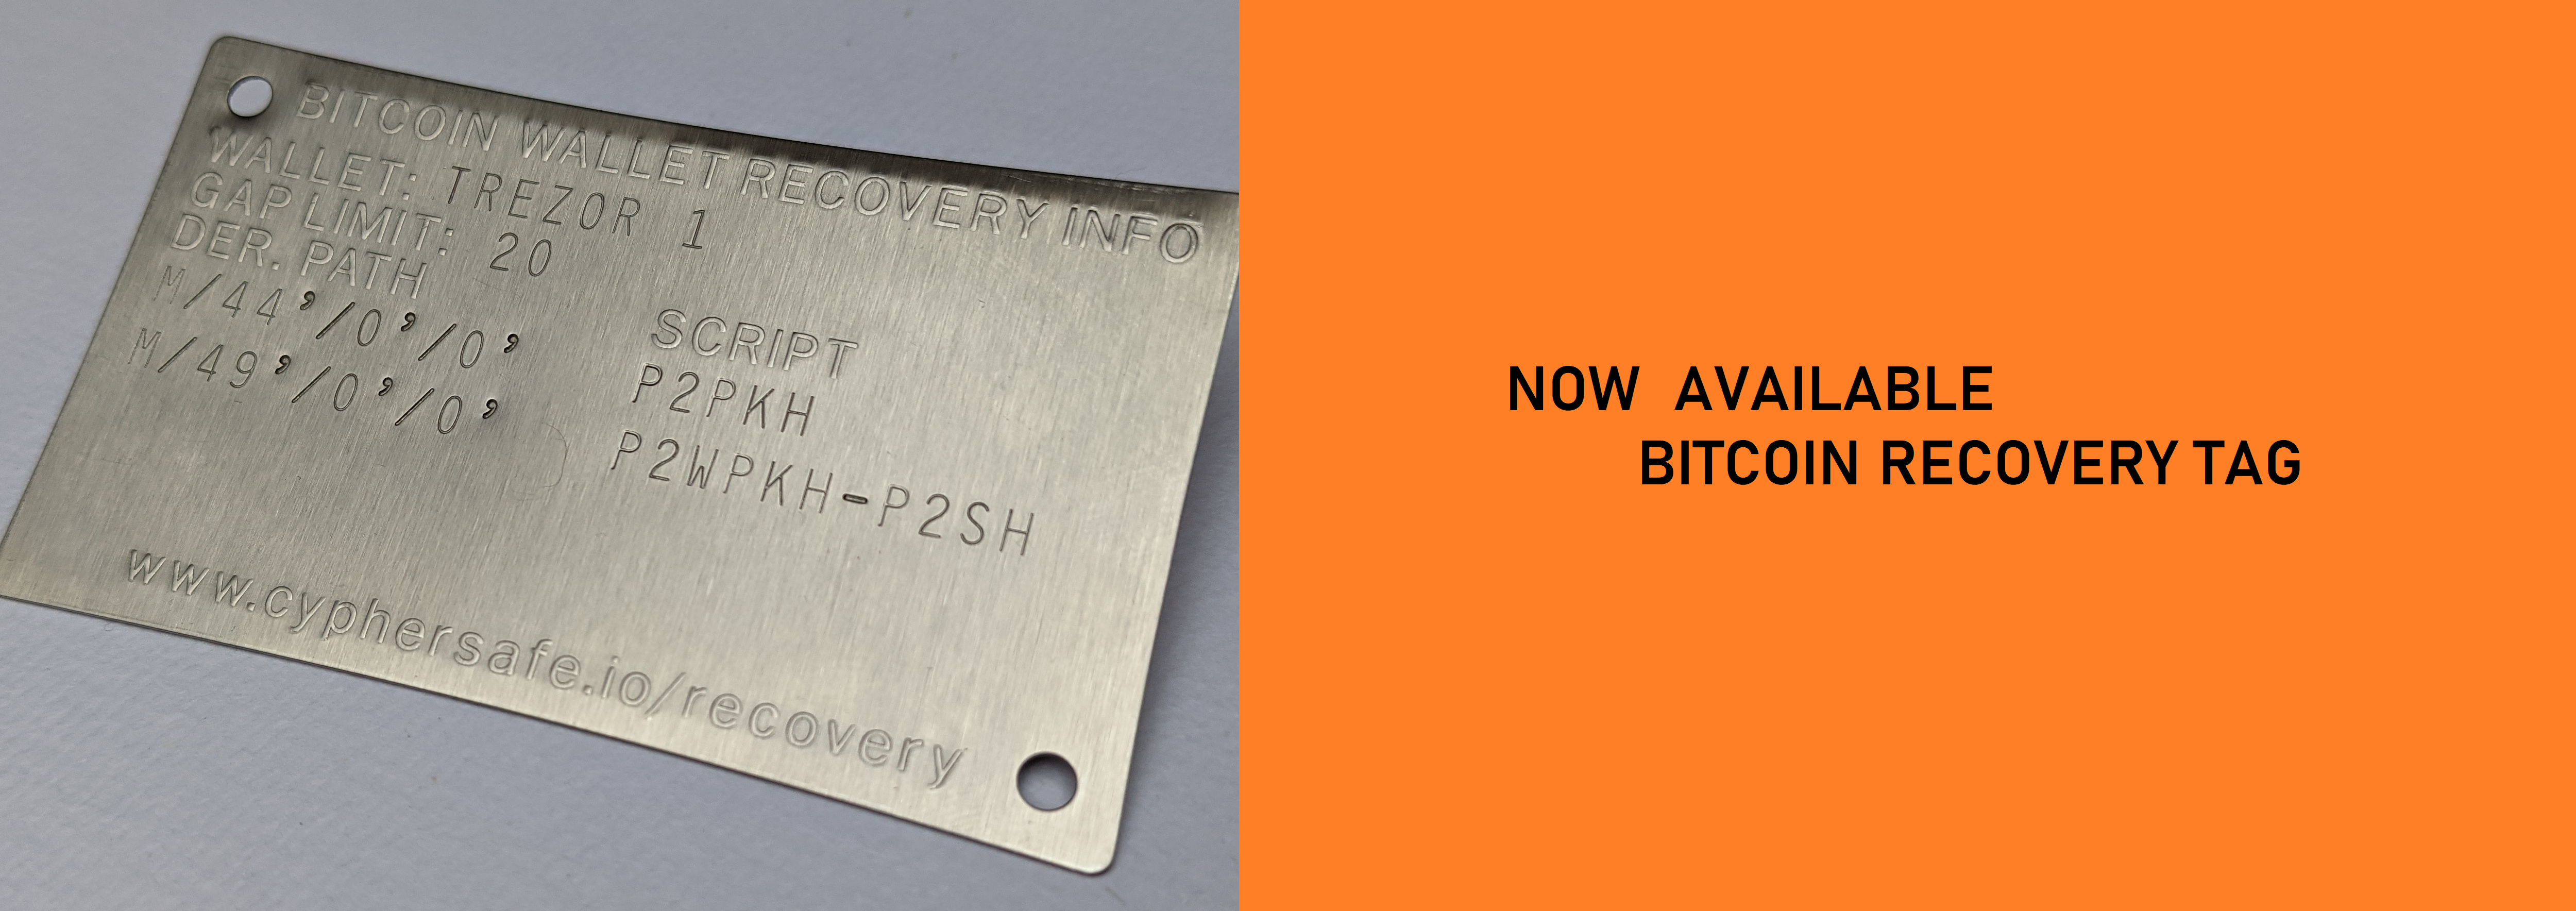 Bitcoin Recovery Tag Slide